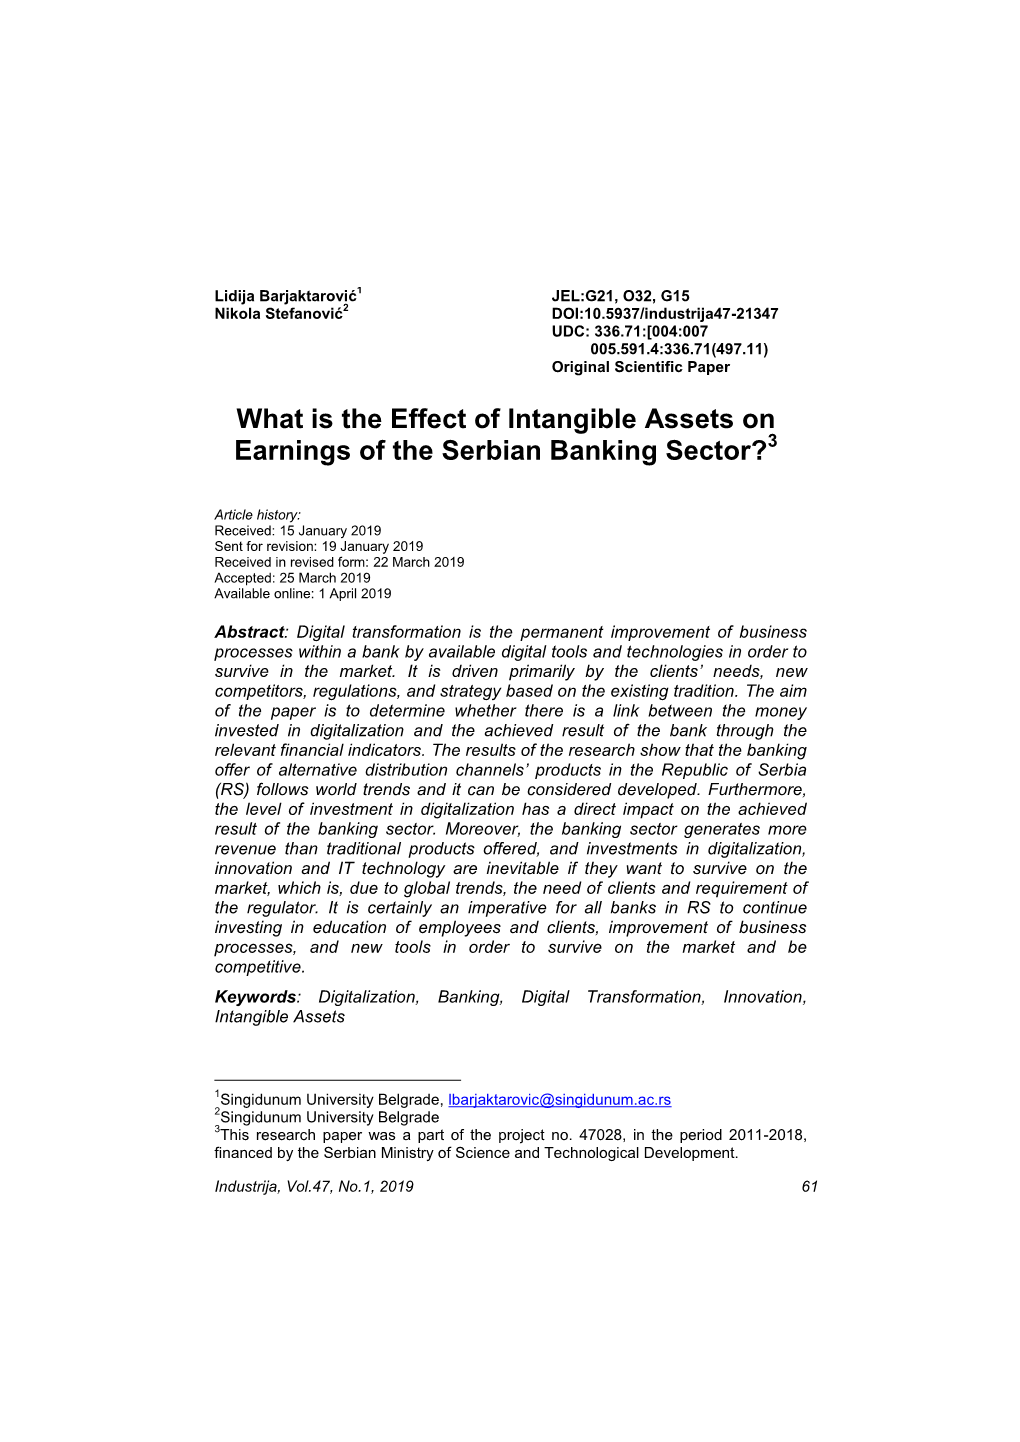 What Is the Effect of Intangible Assets on Earnings of the Serbian Banking Sector?3